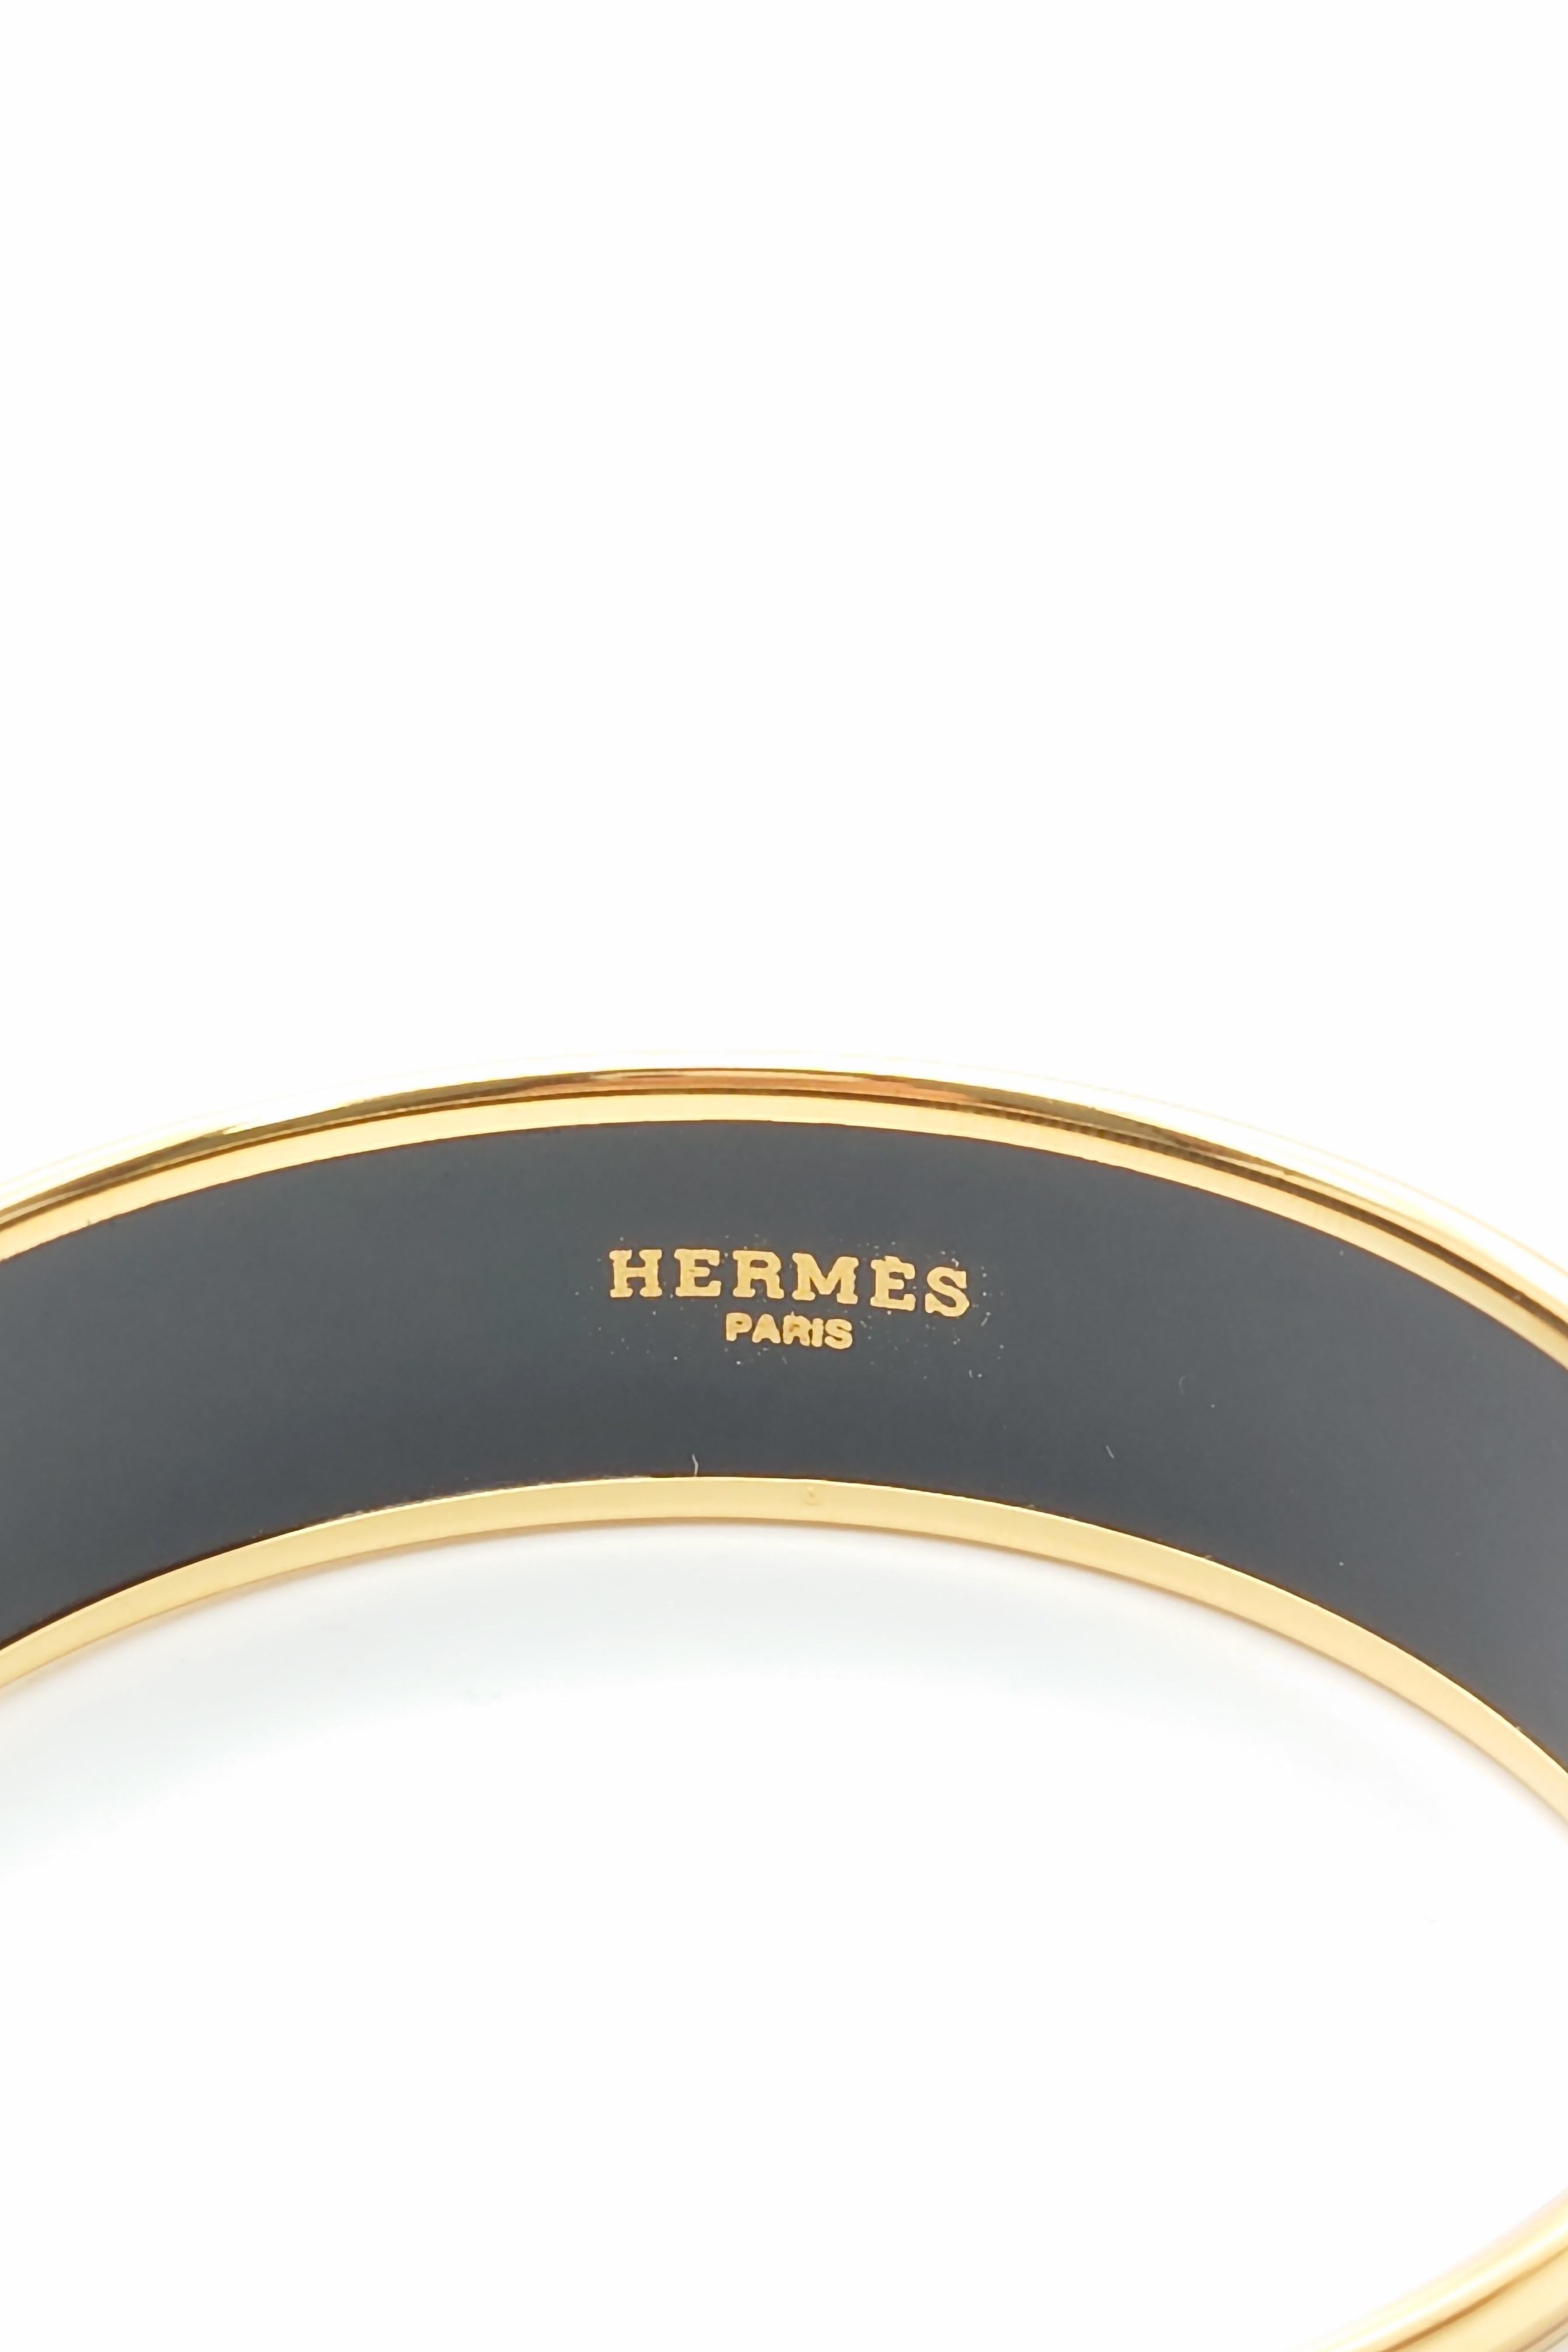 Authentic Hermes Armband Vintage Emaille Armreif 